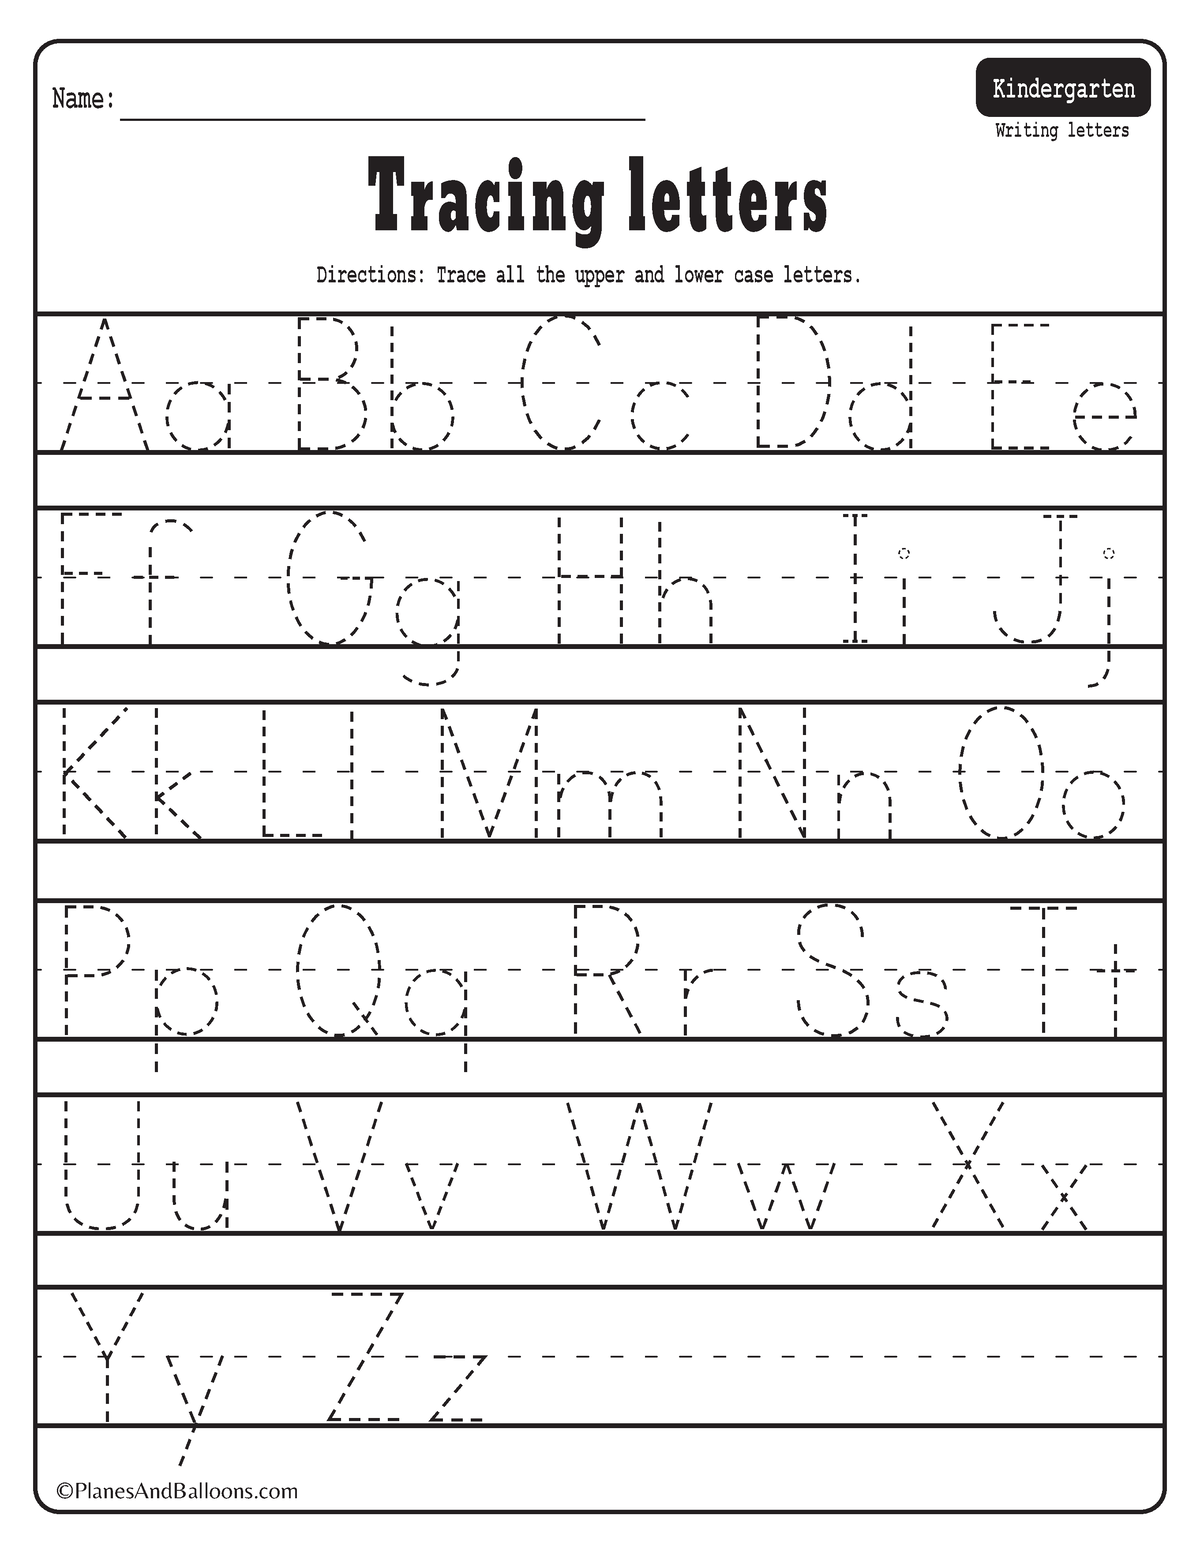 alphabet tracing worksheets pdf directions trace all the upper and lower case letters tracing studocu